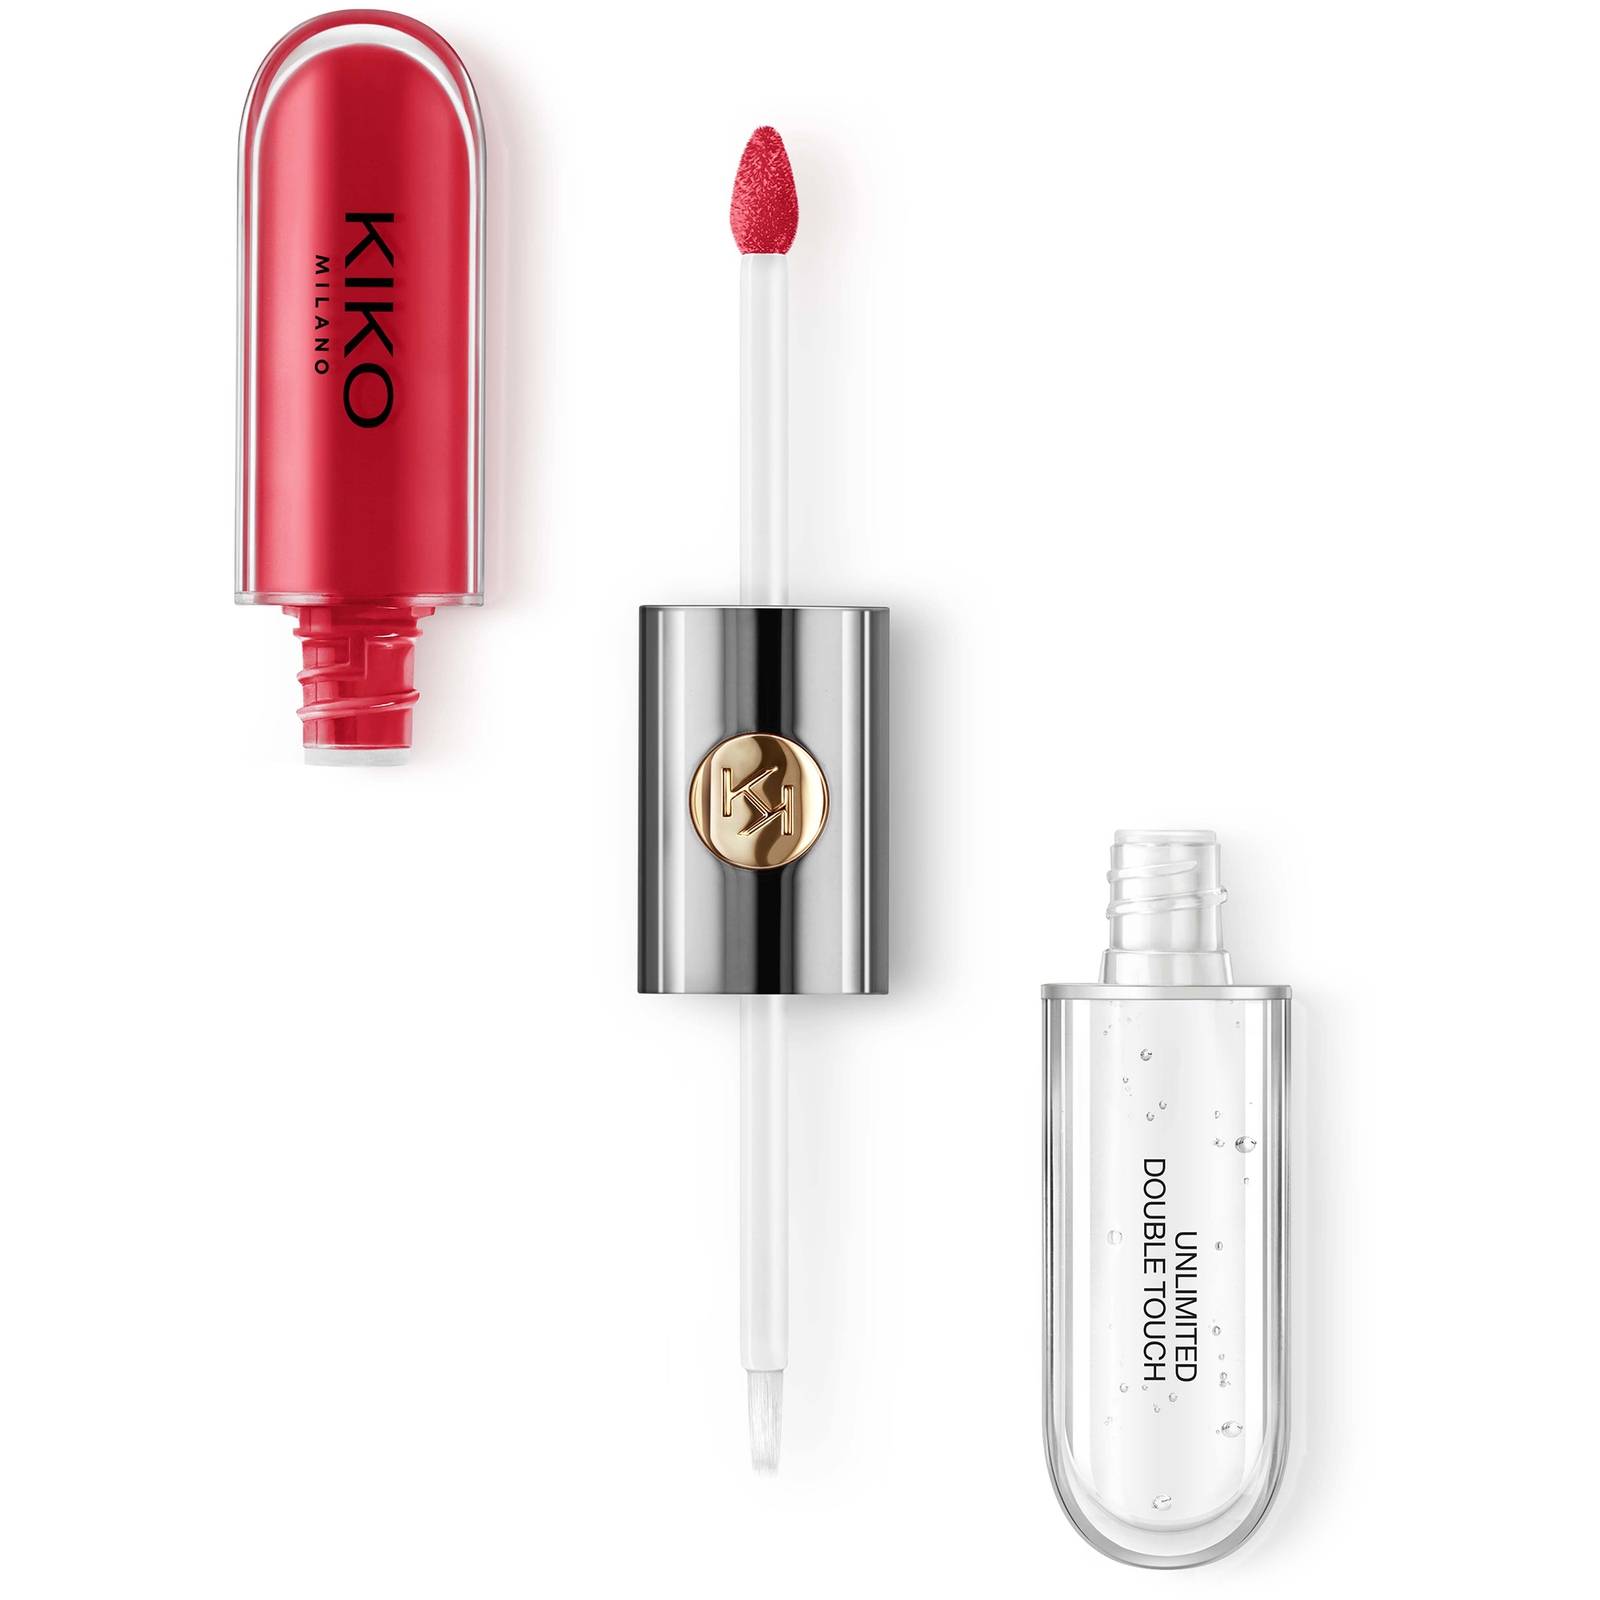 KIKO Milano Unlimited Double Touch 6ml (Various Shades) - 109 Strawberry Red